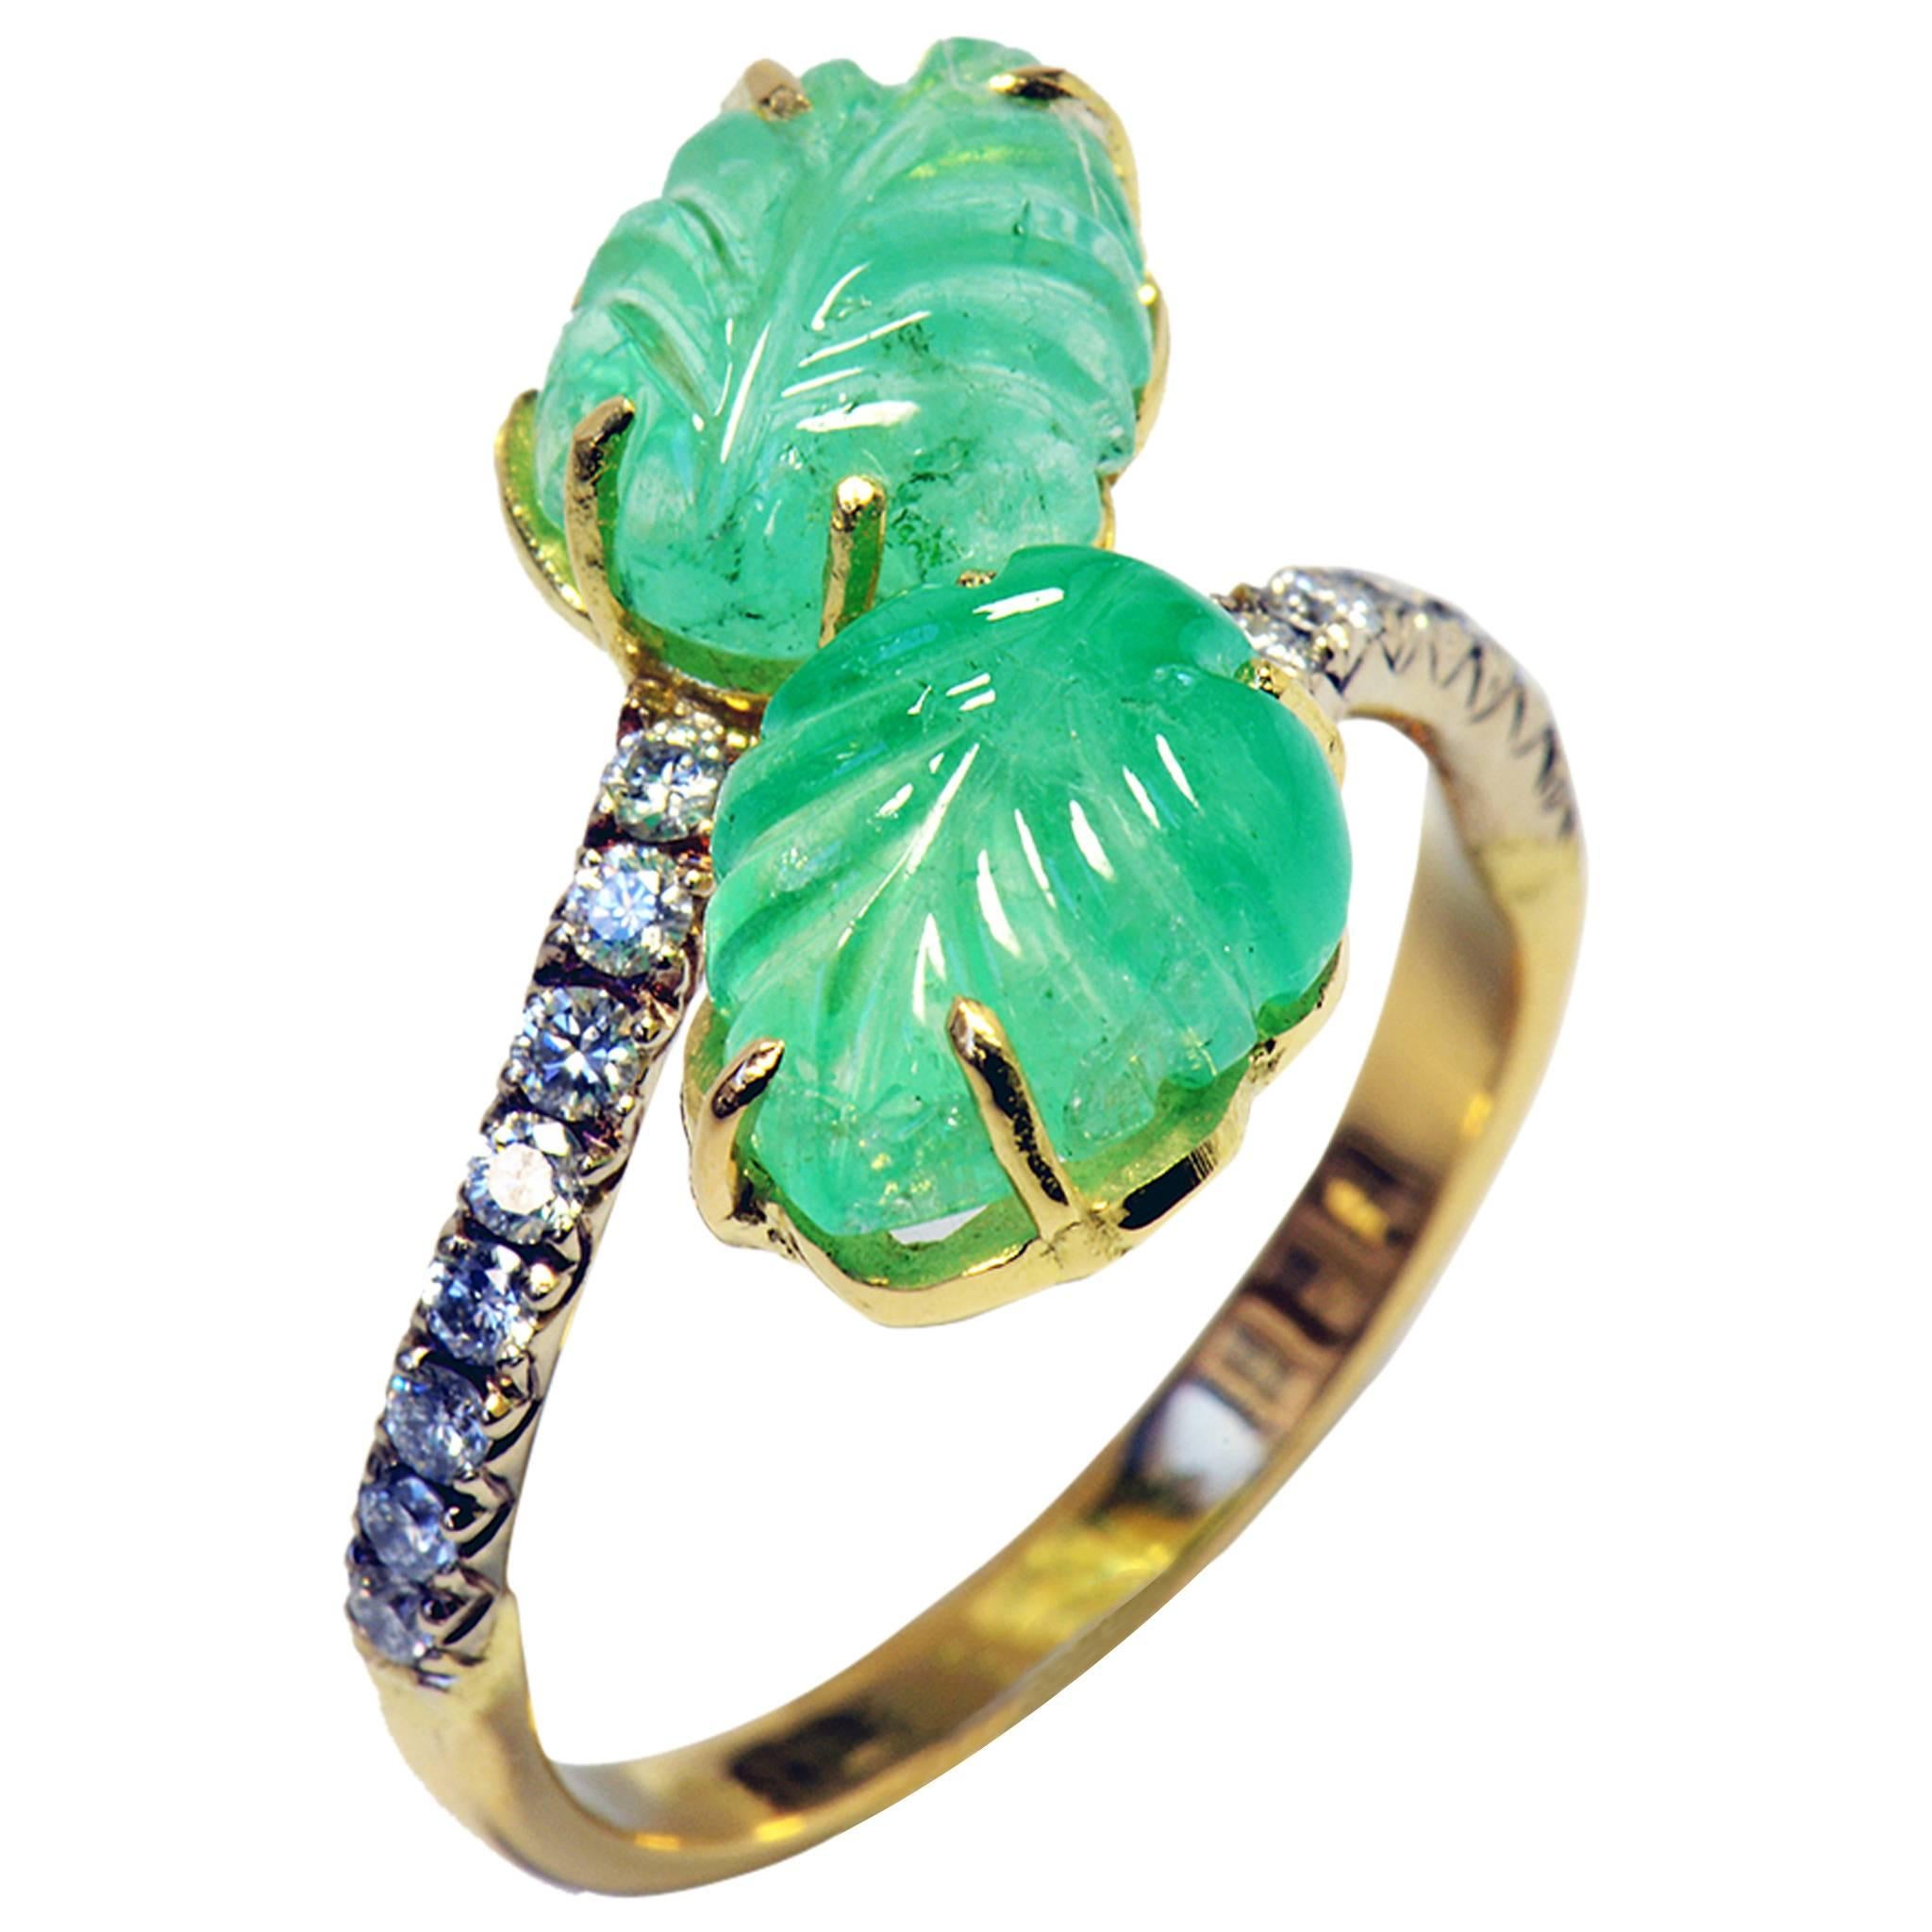 Unique Engraved Emerald Leaves and Diamonds You and Me Ring by Marion Jeantet